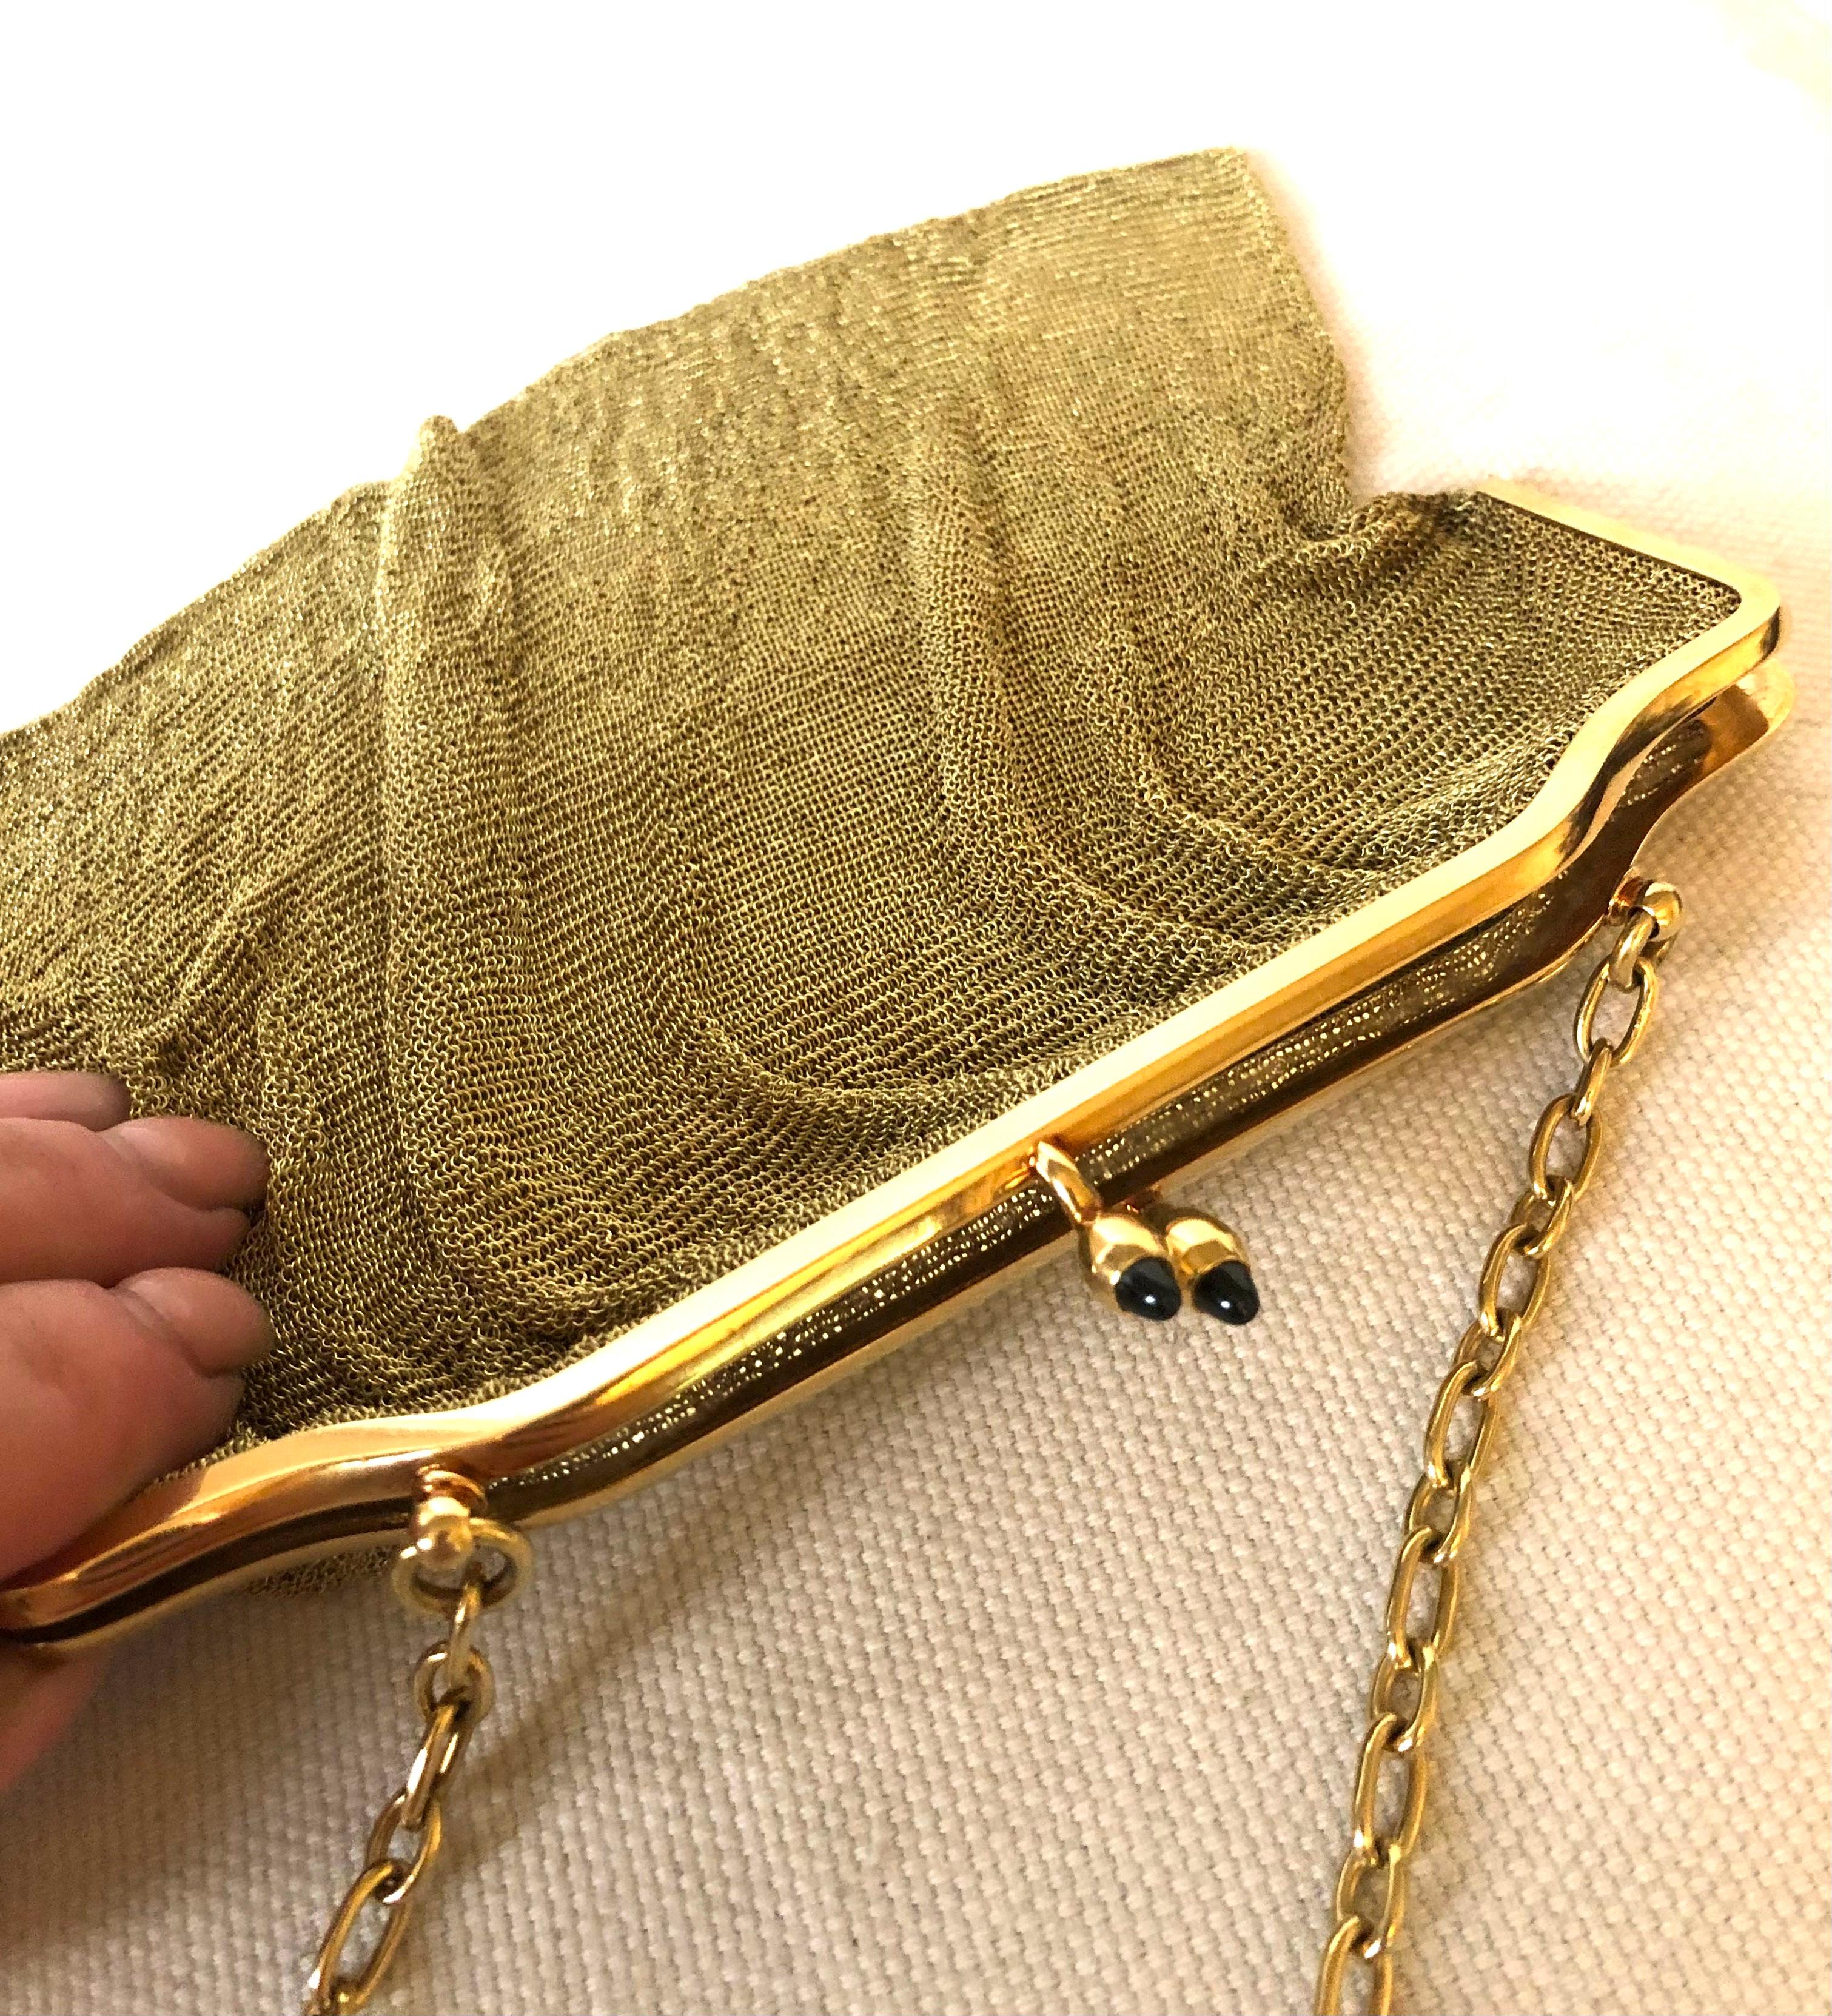 An extremely rare antique vintage mesh purse made of 18K yellow gold. A very sophisticated object which will complete any special outfit. The lock on the bag is decorated with two cabochon sapphires. and the handle is represented by golden chain 13